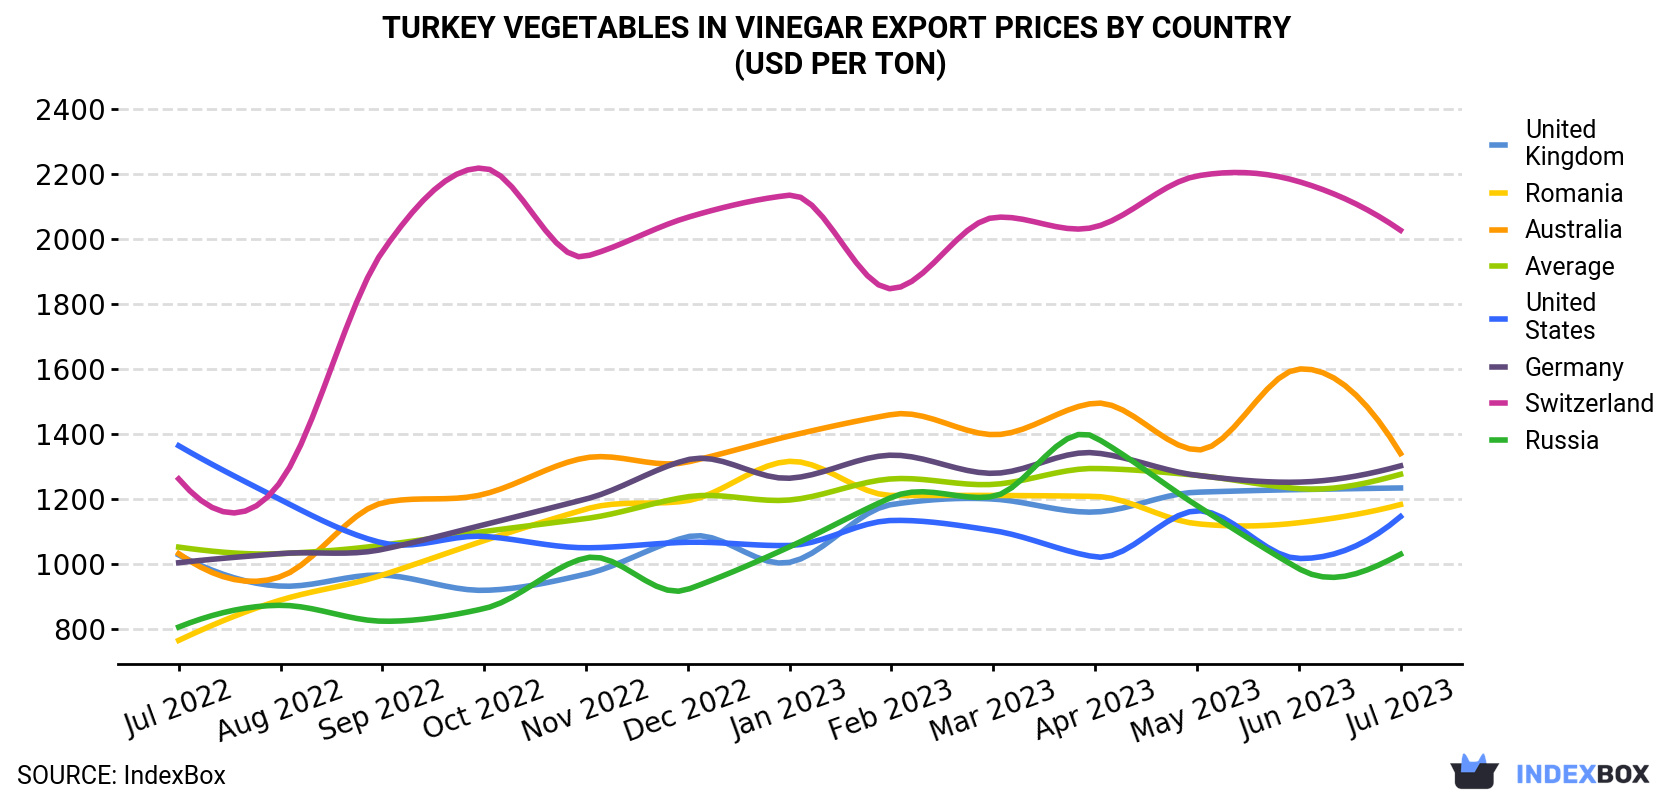 Turkey Vegetables In Vinegar Export Prices By Country (USD Per Ton)